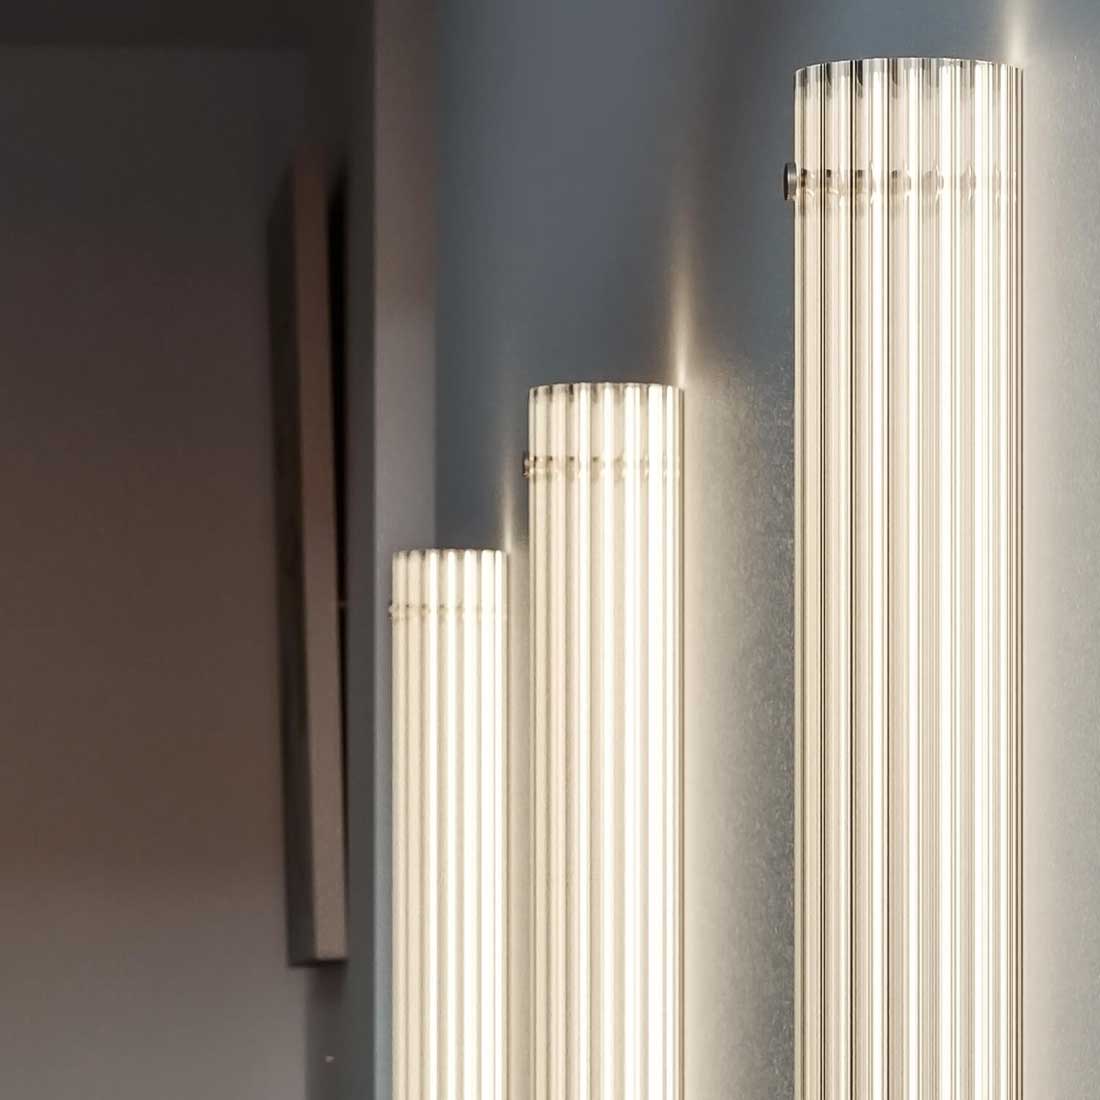 Temple Pillar Lights sold by South Charlotte Fine Lighting are ribbed wall lights